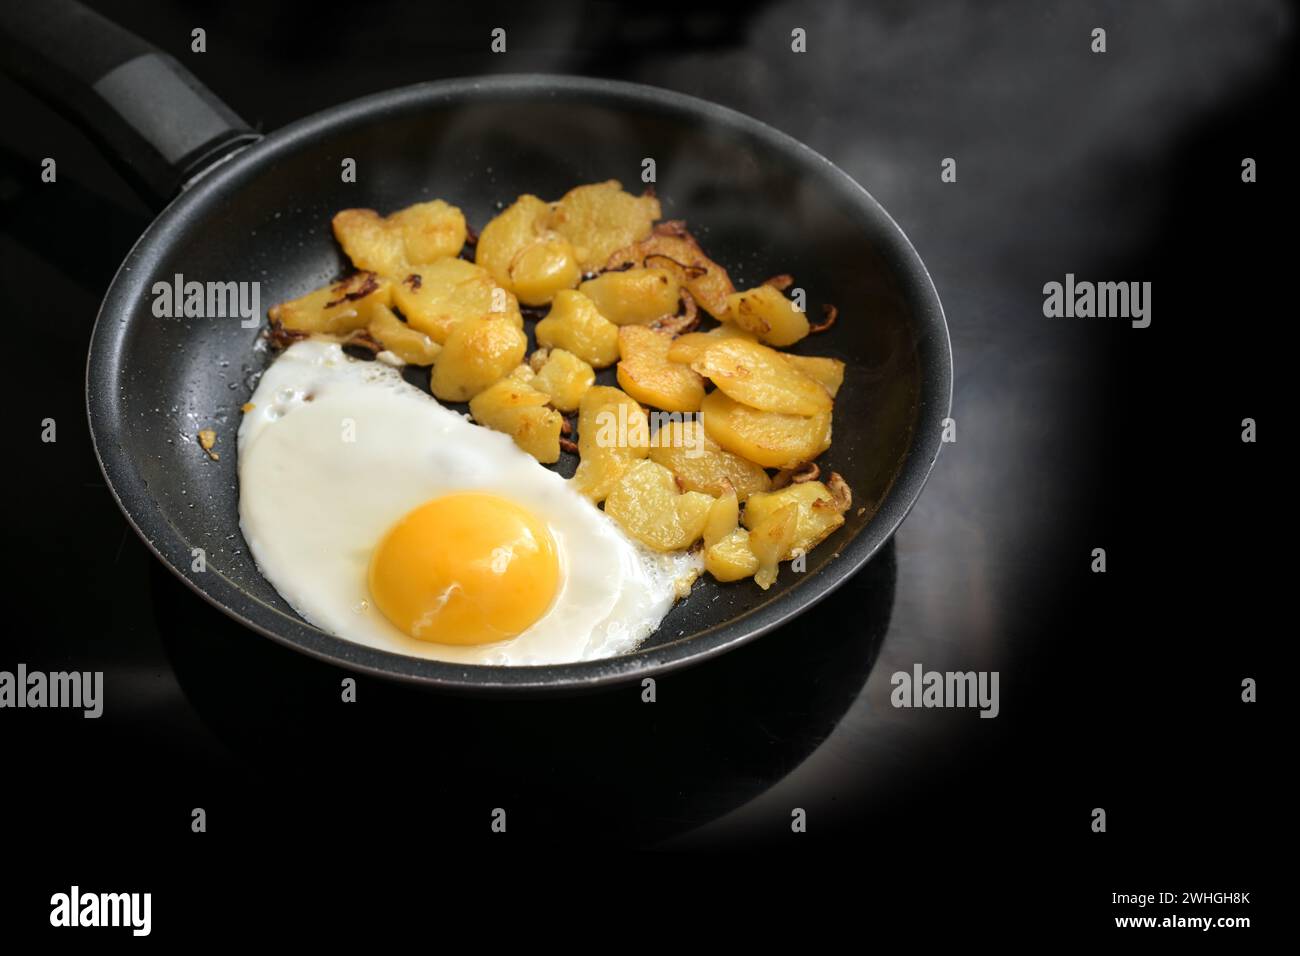 Fried egg and roast potatoes in a black frying pan on the stove in the kitchen, simple cooking, copy space, selected focus Stock Photo